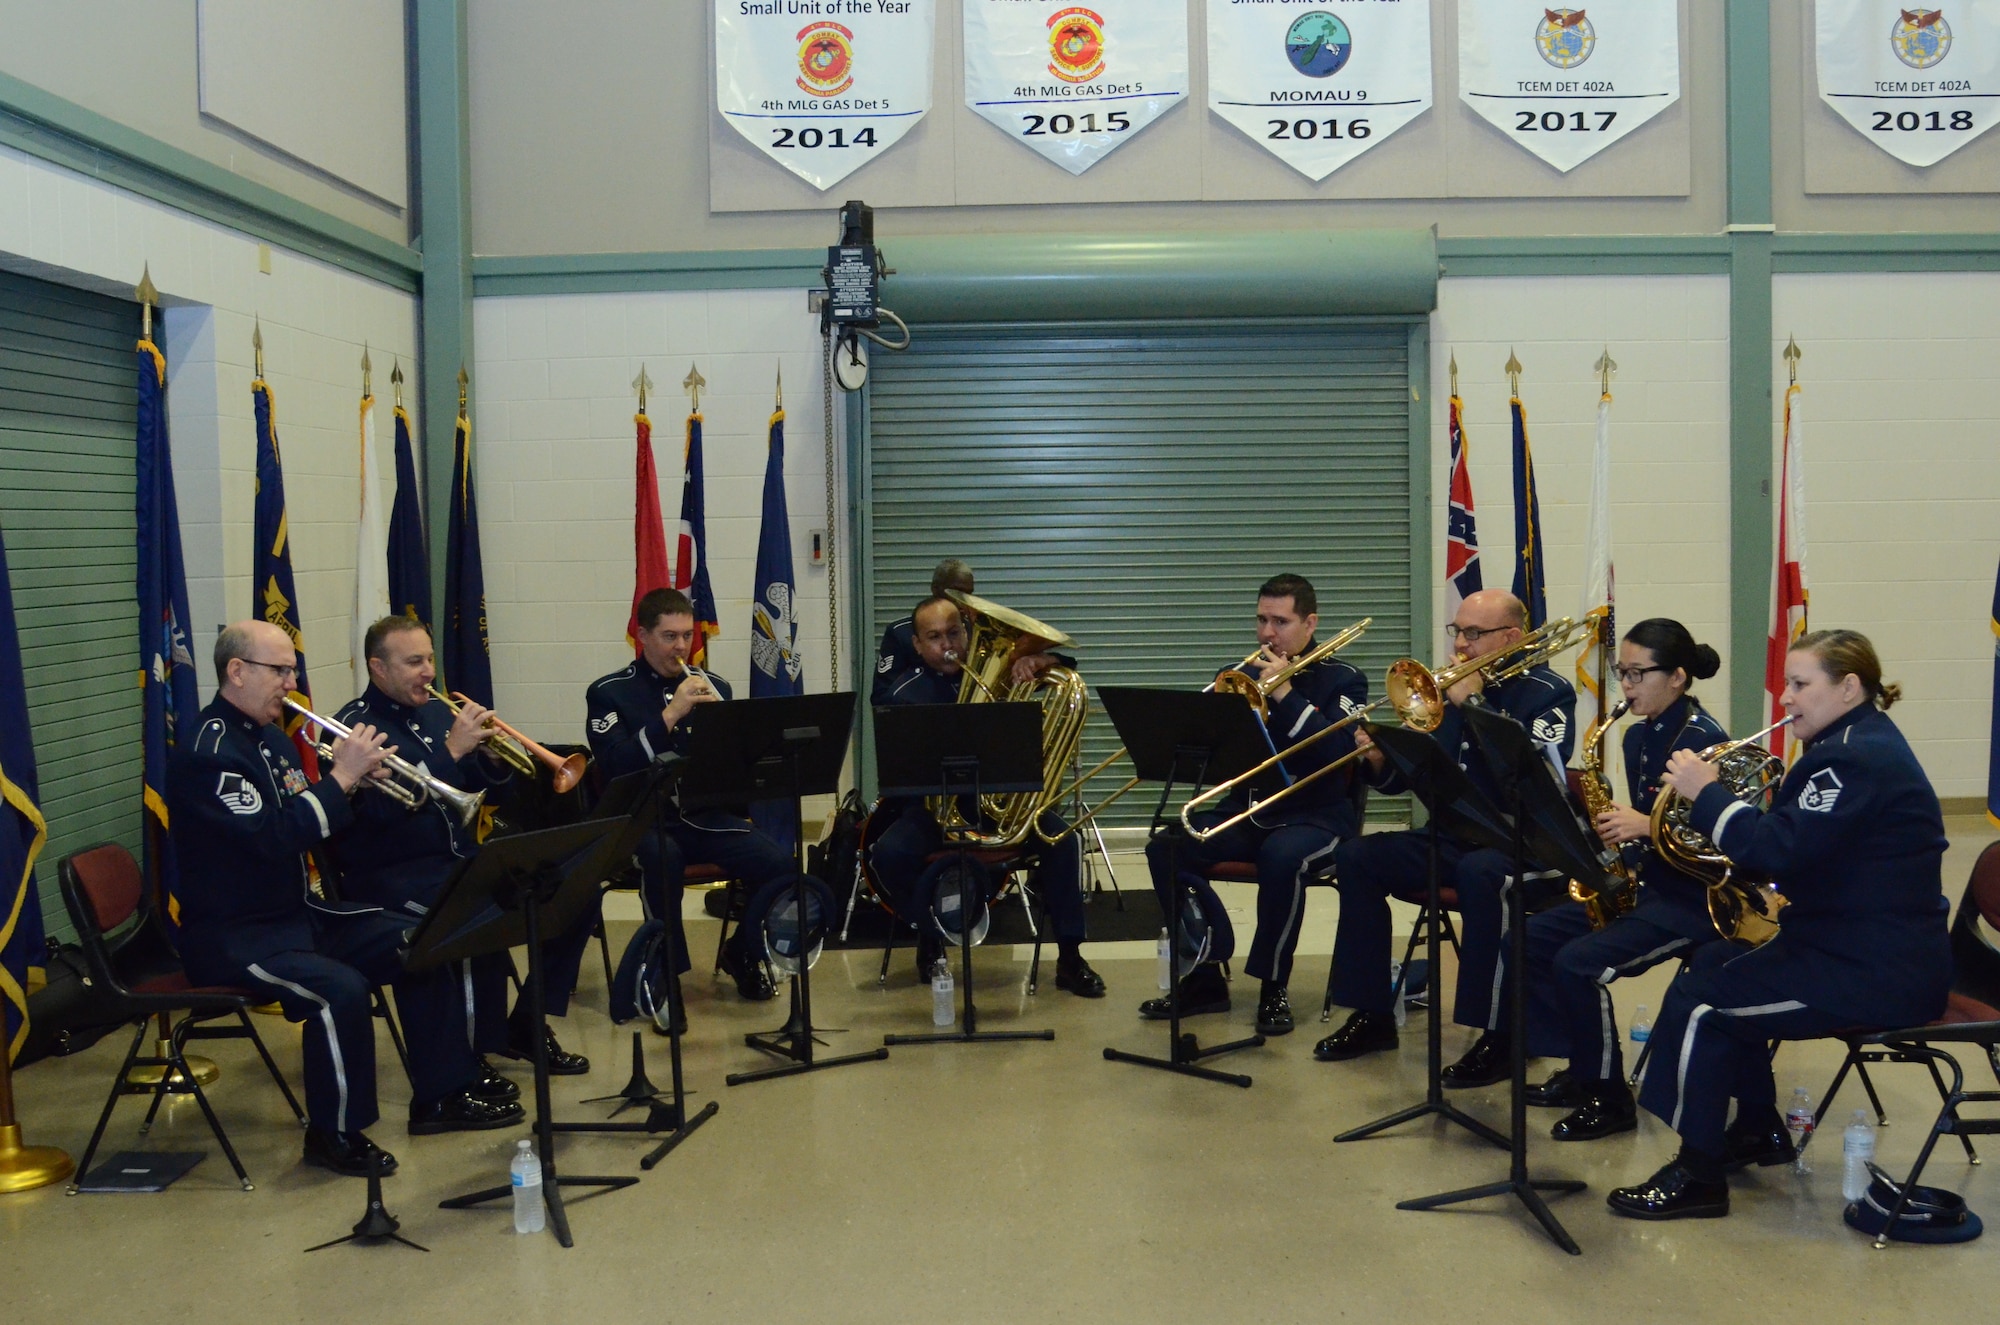 The Air National Guard's Band of the Southwest provided prelude music as well as the National Anthem and Air Force song for the Tenth Air Force Change of Command held at Naval Air Station Fort Worth Joint Reserve Base, Texas on May 10.